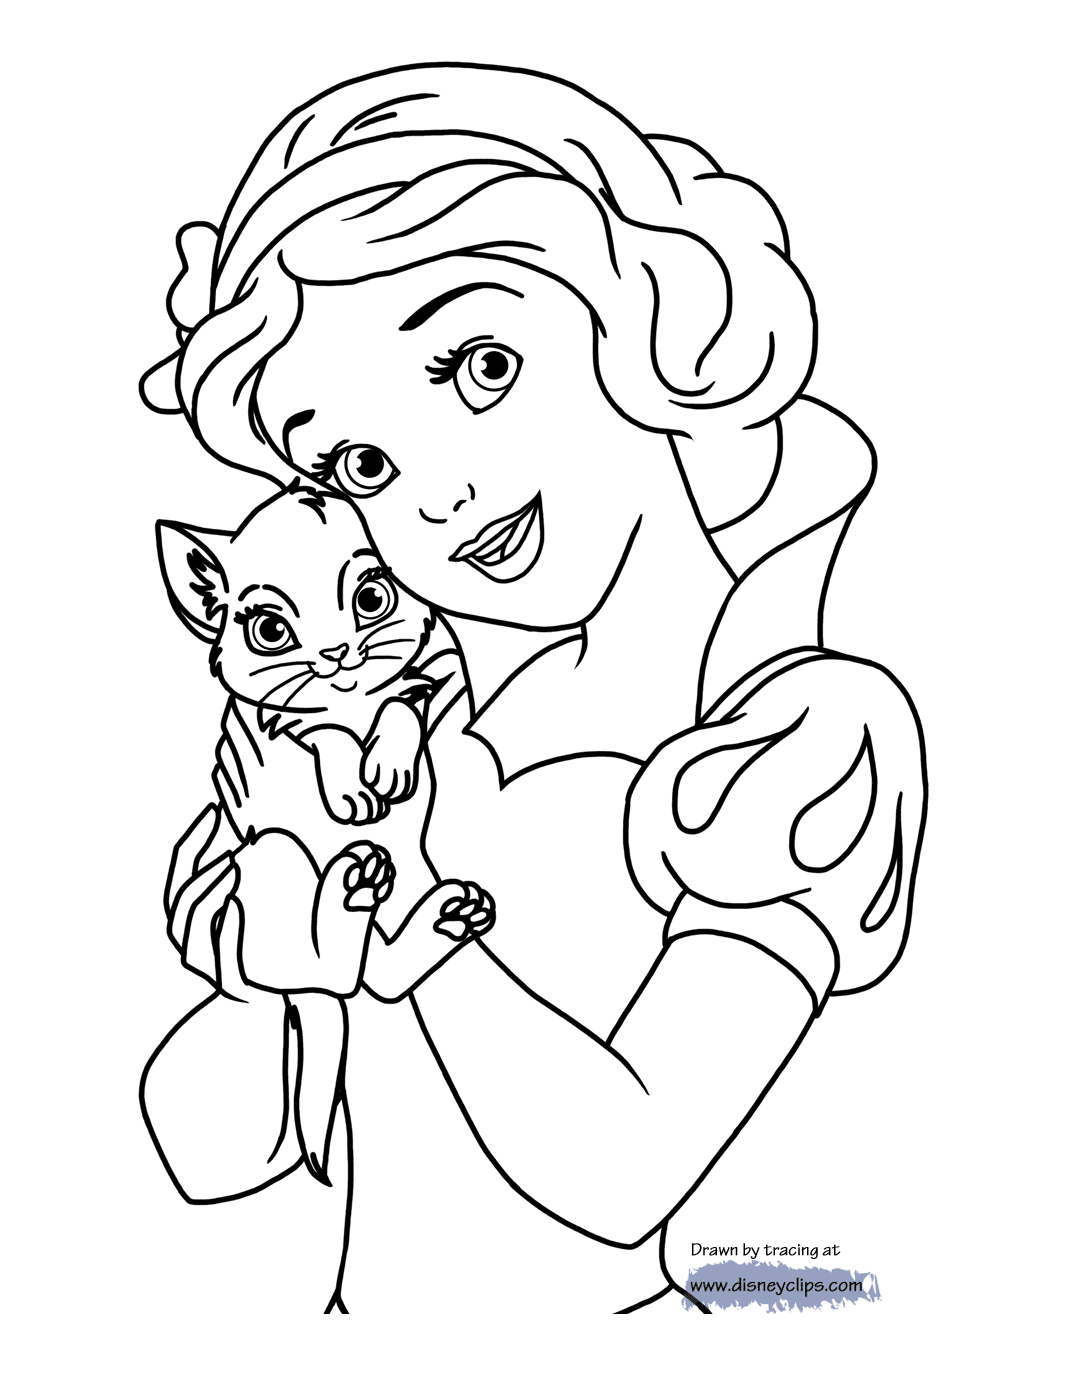 coloring page Snow White with a kitten